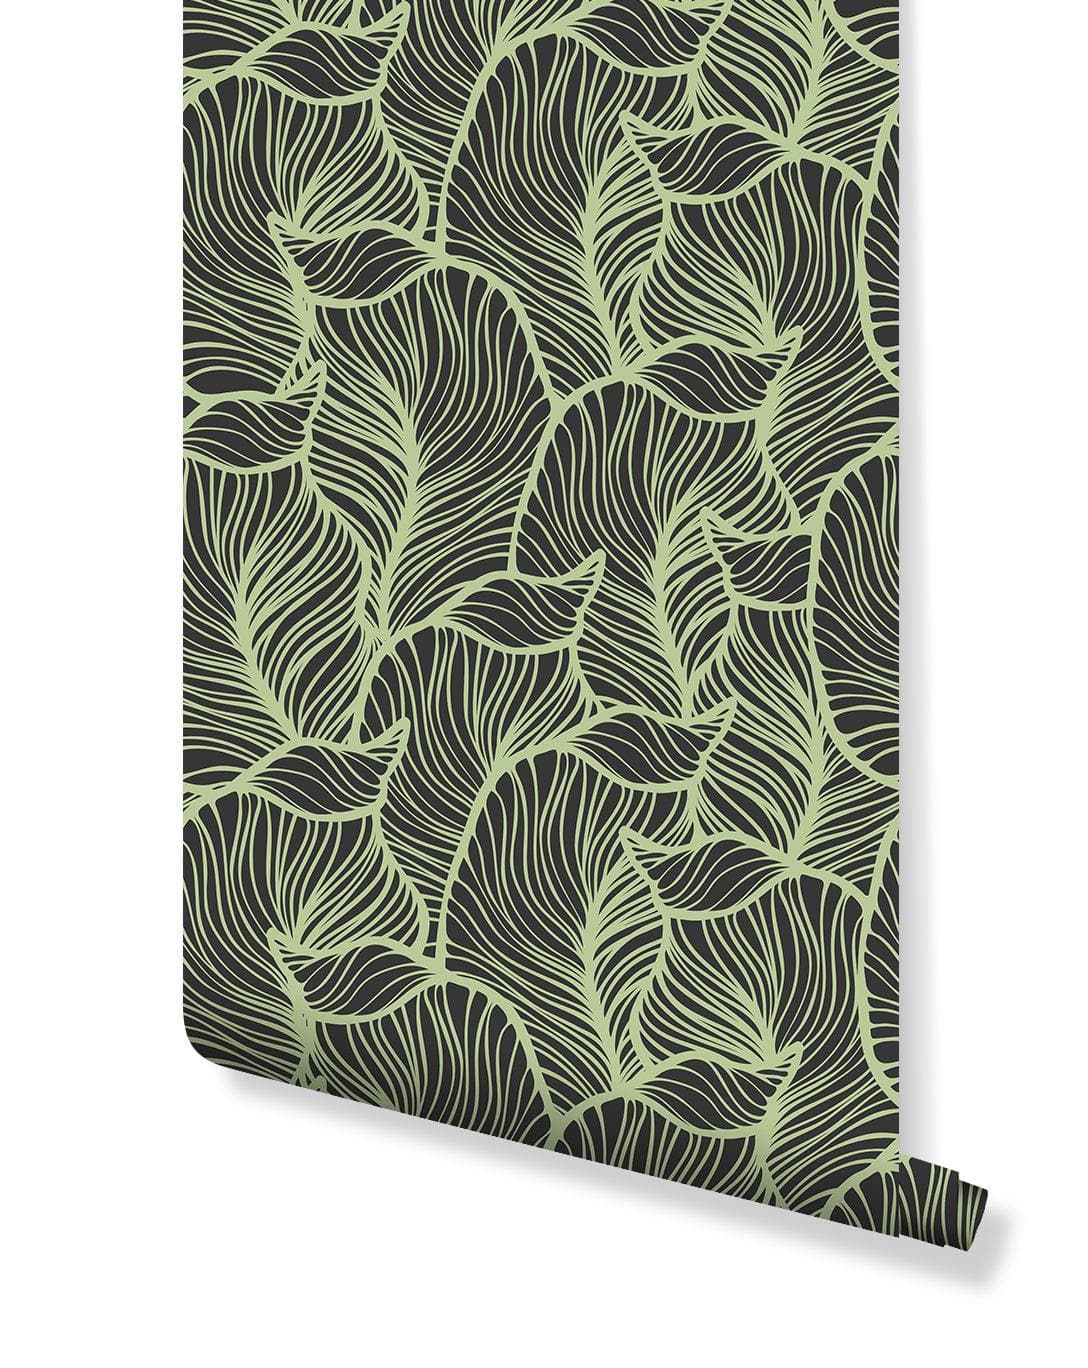 Green Tropical Leaves Removable Wallpaper Green Tropical Leaves Removable Wallpaper 